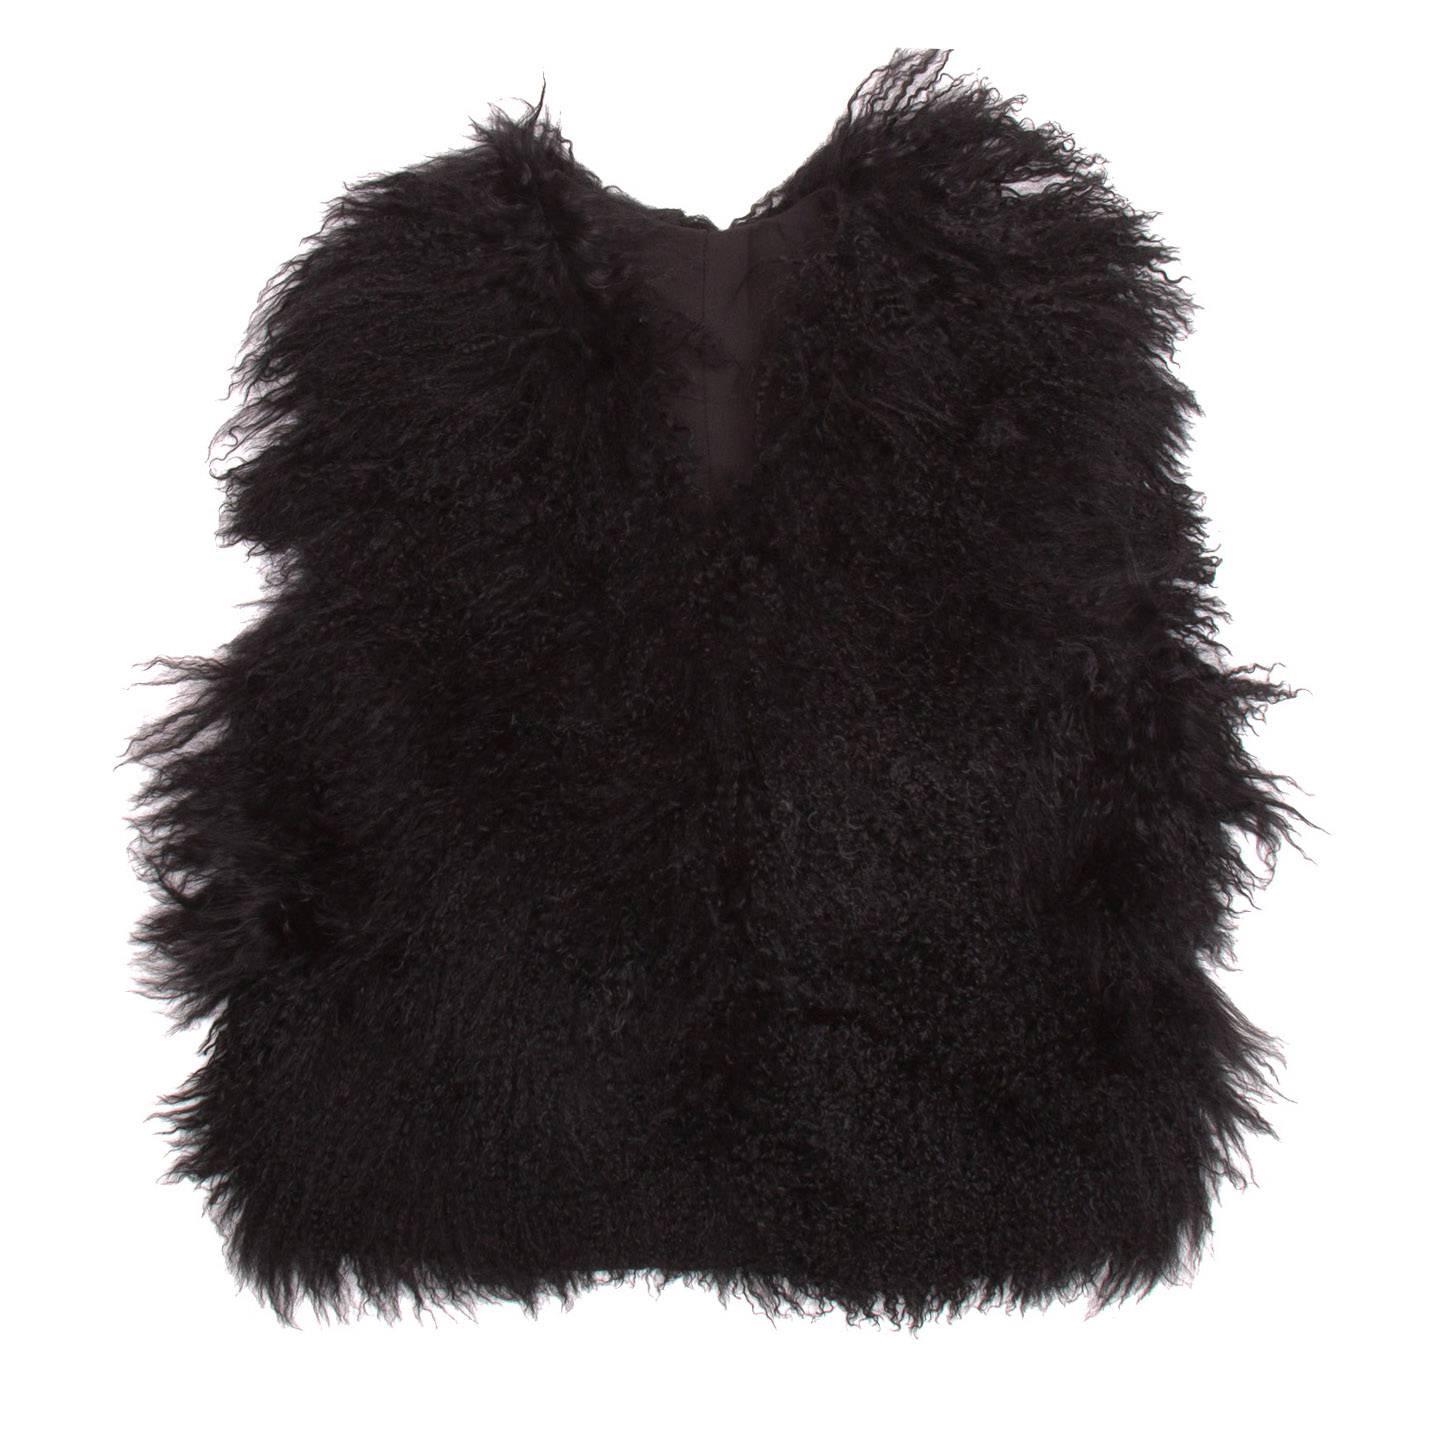 Black waist length Mongolian fur gilet with hook and eye fastening. Purchased in London at Browns.

Size  L Universal sizing

Condition  Excellent: never worn